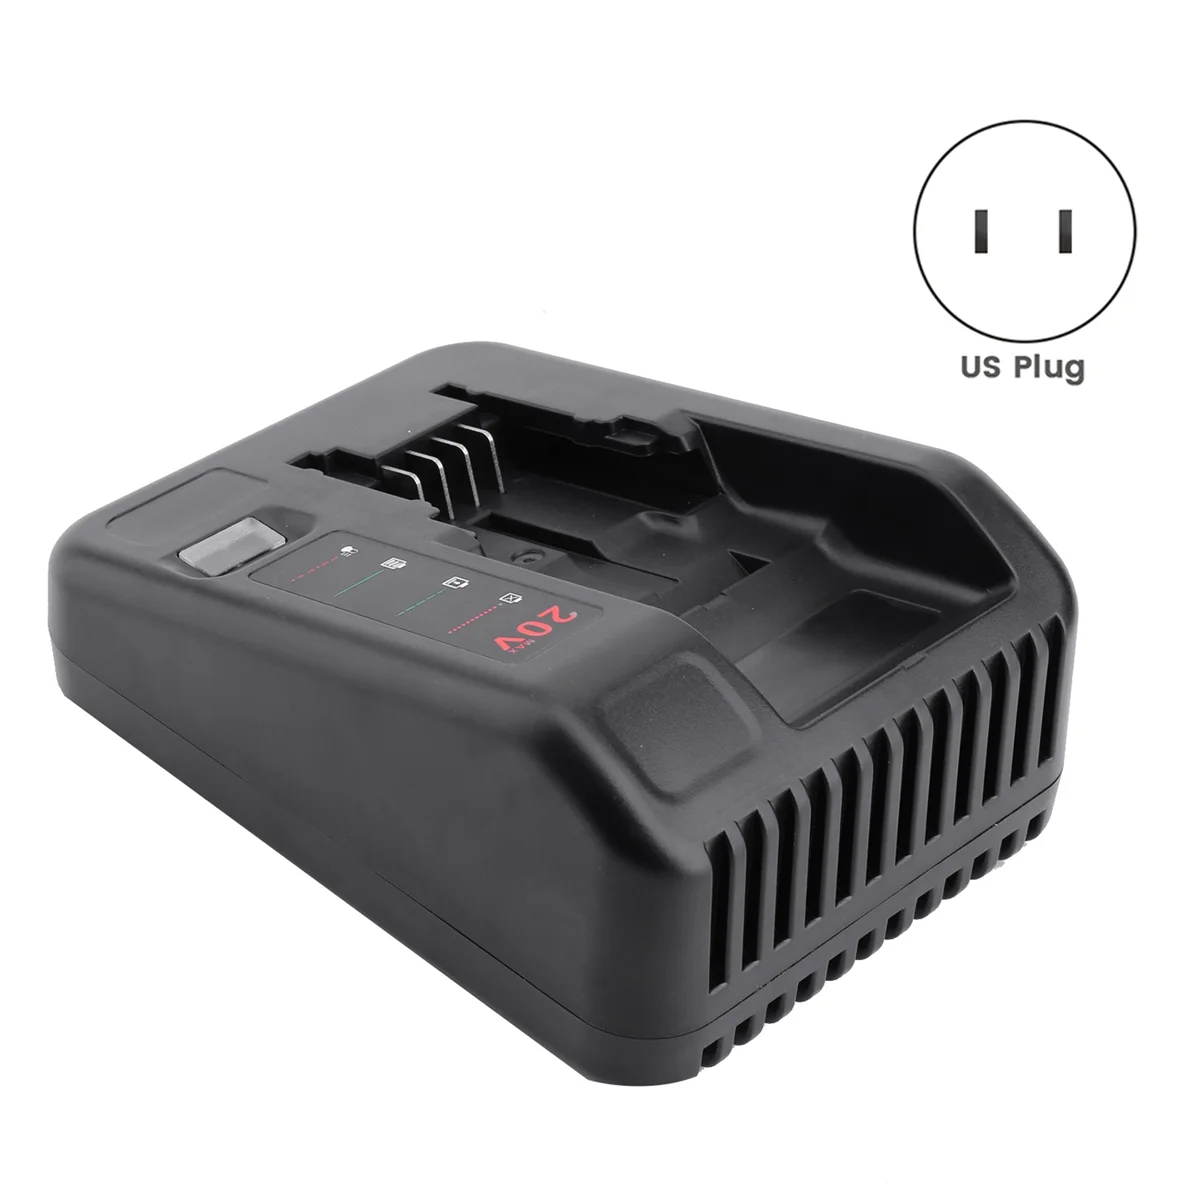 https://ae01.alicdn.com/kf/S4bcc380a01444d1fb4759423faf44511X/20V-Lithium-Battery-Charger-for-Black-and-Decker-PORTER-CABLE-Stanley-Lithium-Battery-Charger-US-Plug.jpg